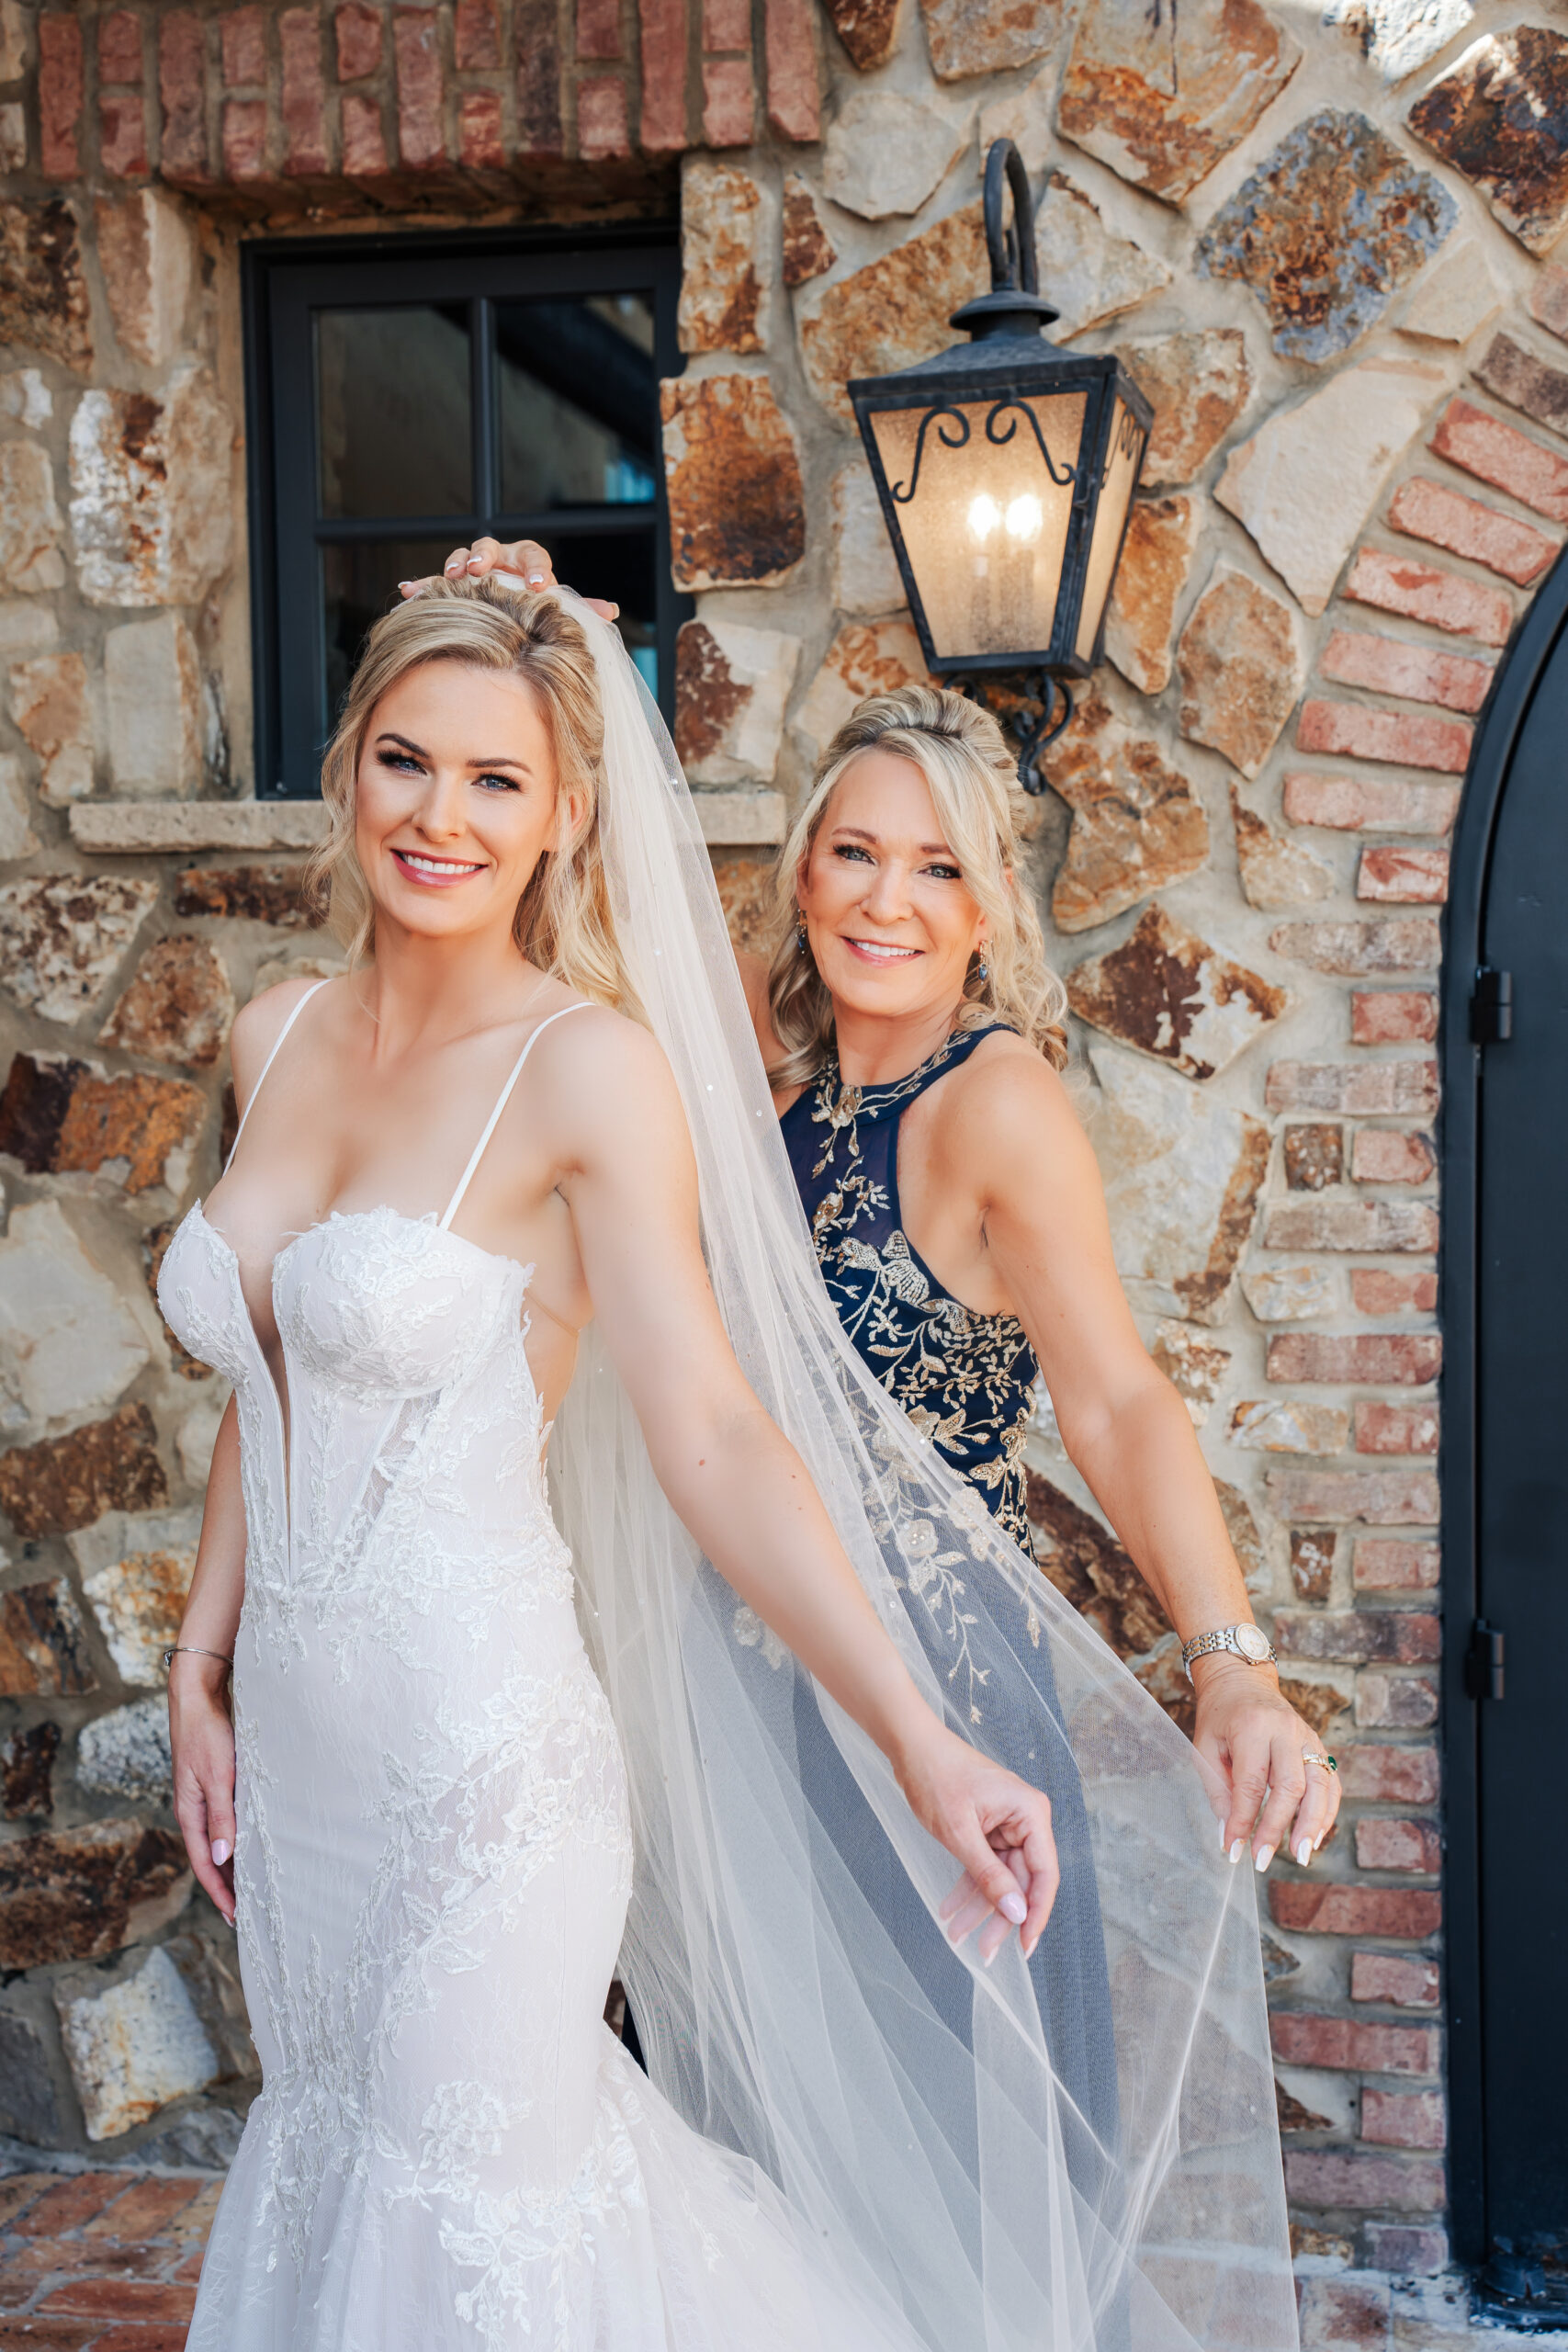 Mother of the bride and bride posing in front of the venue with hair and makeup done by Kristys Artistry Design Team.